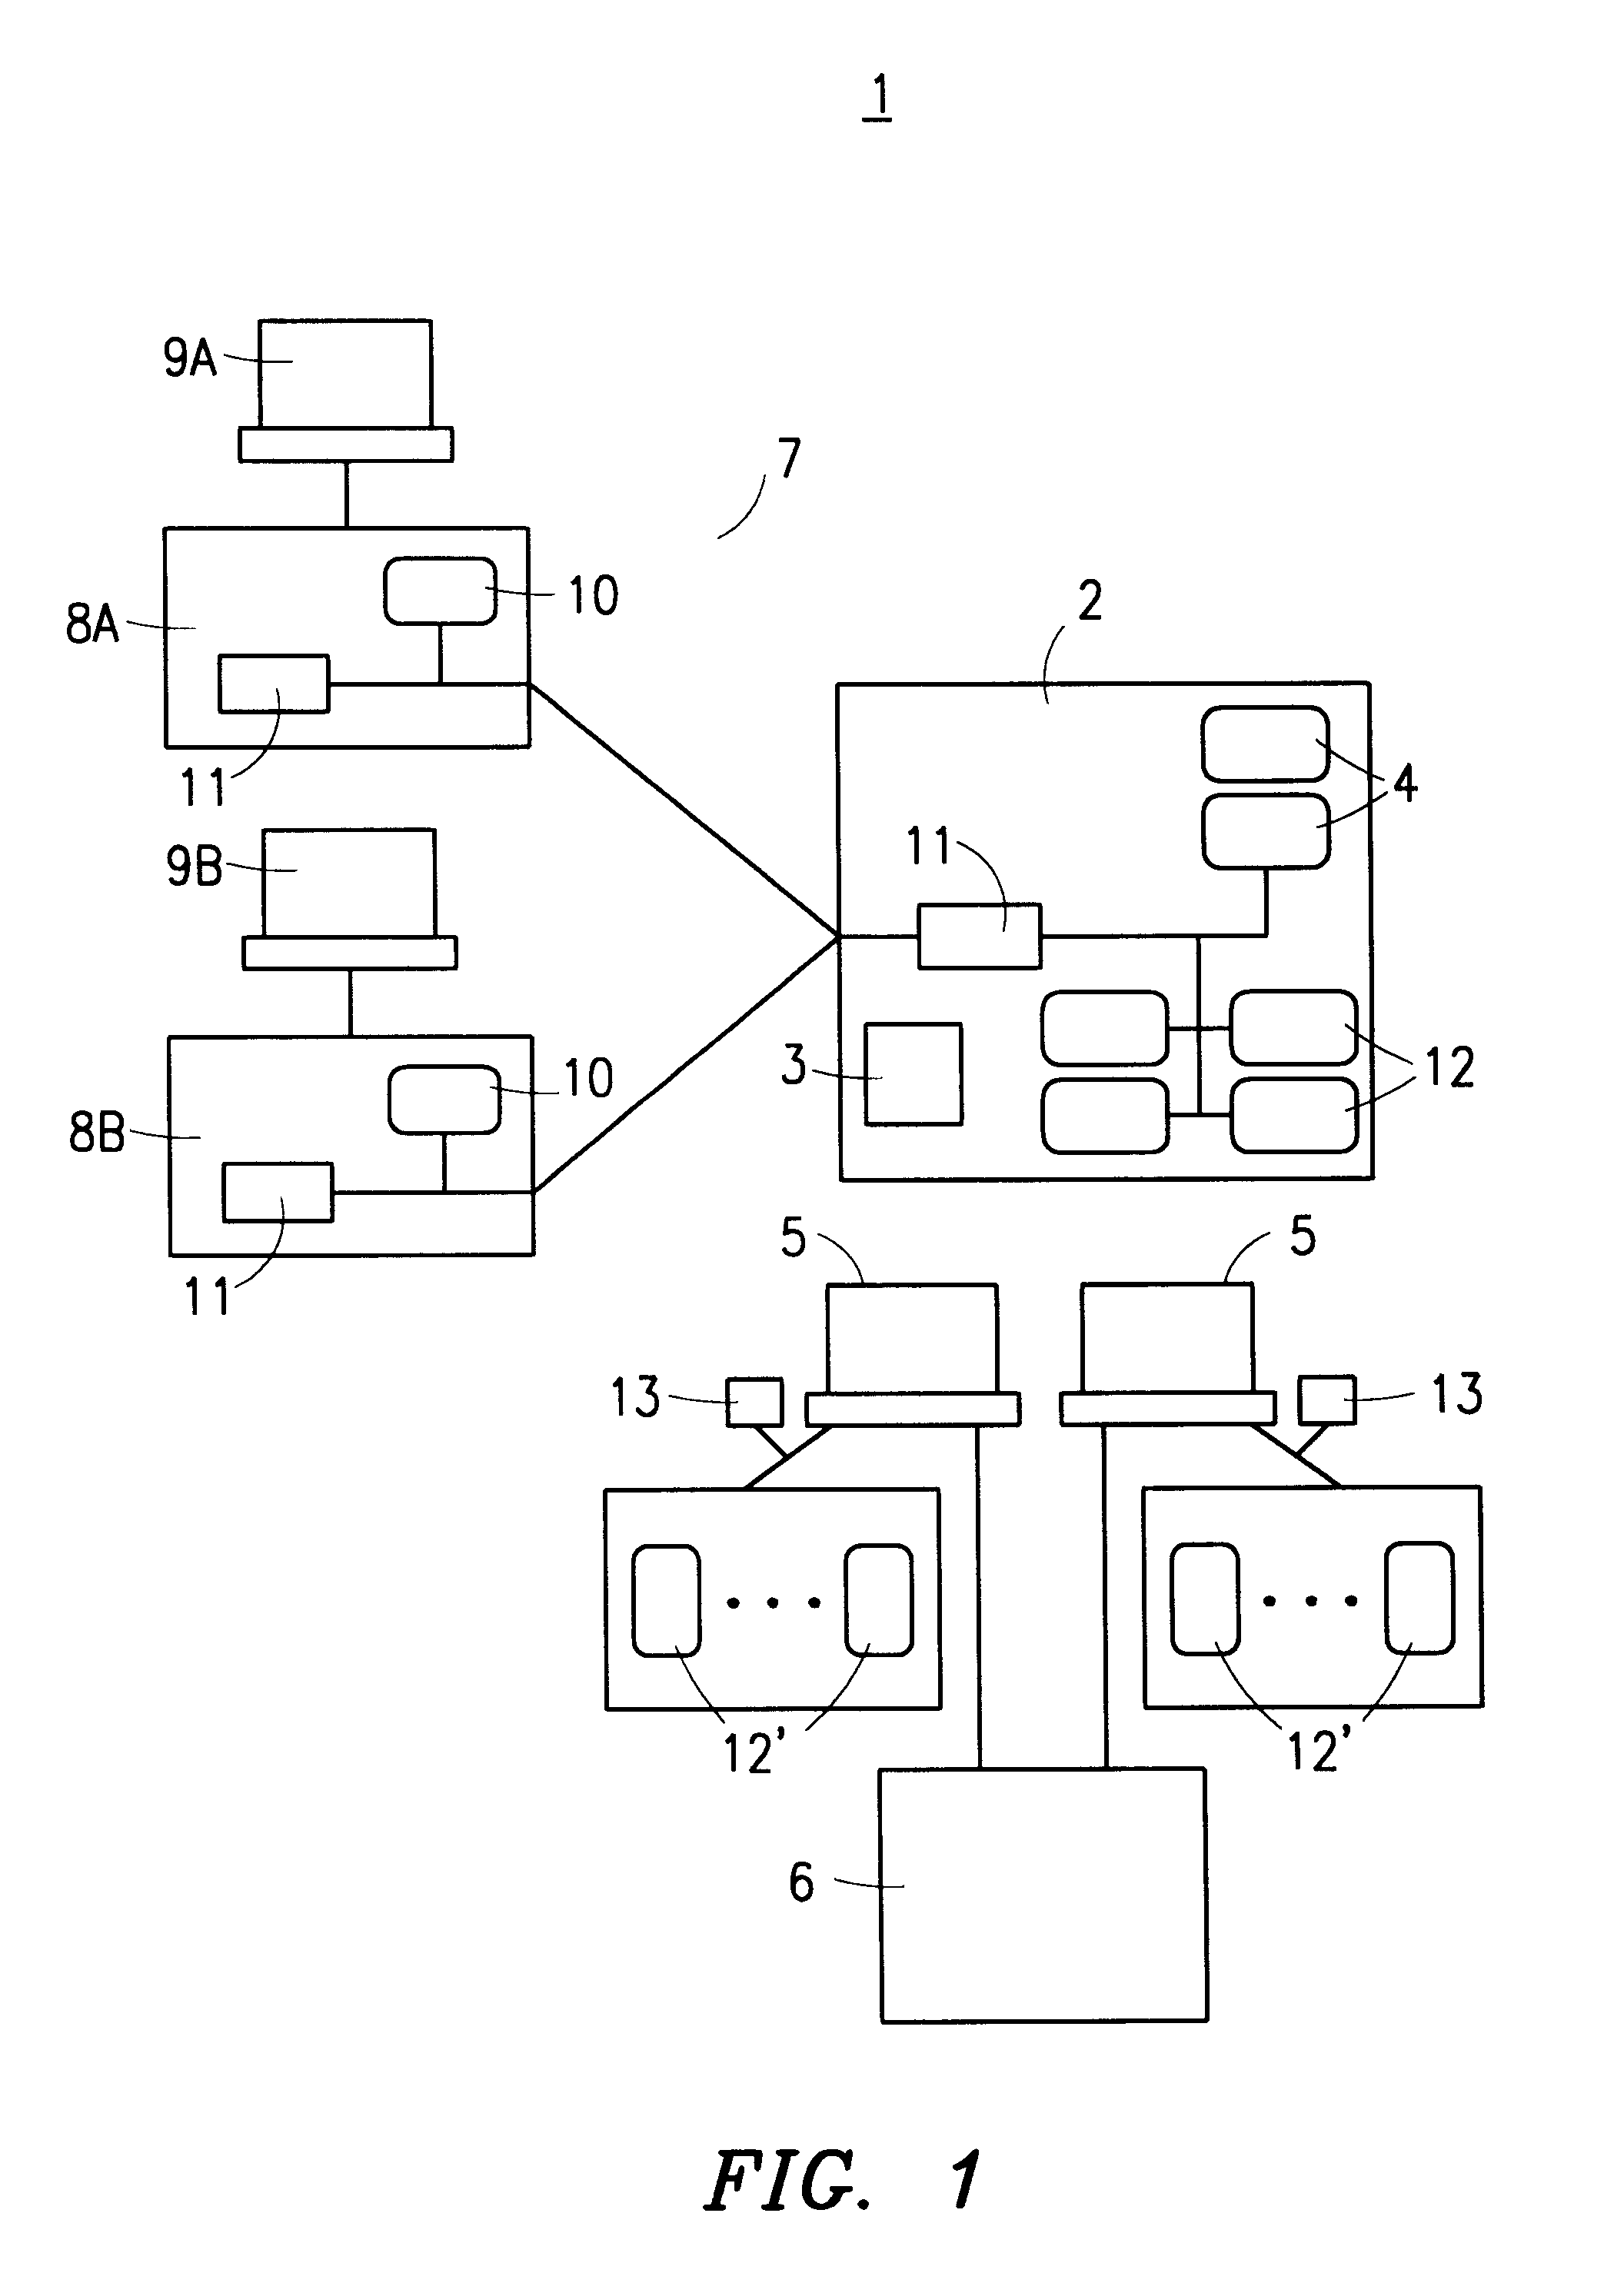 System and method for processing telephone calls